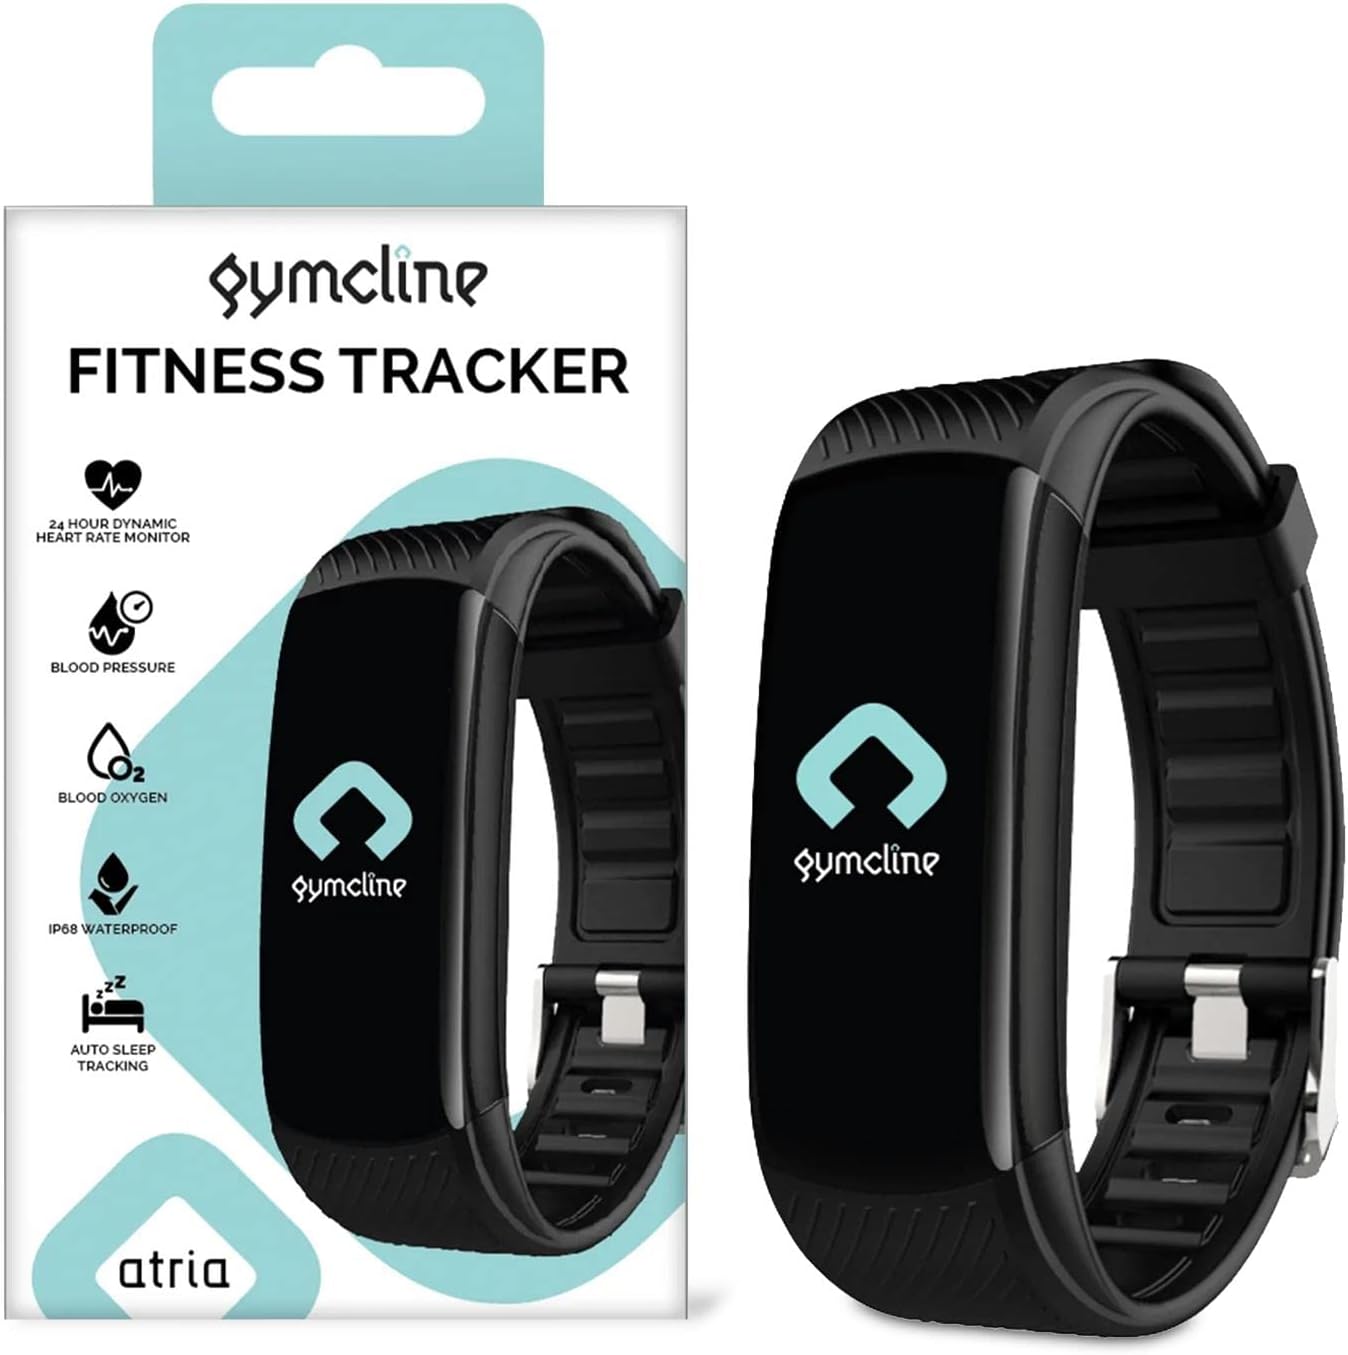 Gymcline Atria Fitness Tracker with 24H Daily Activity Tracking (Black) RRP 29.99 CLEARANCE XL 14.99